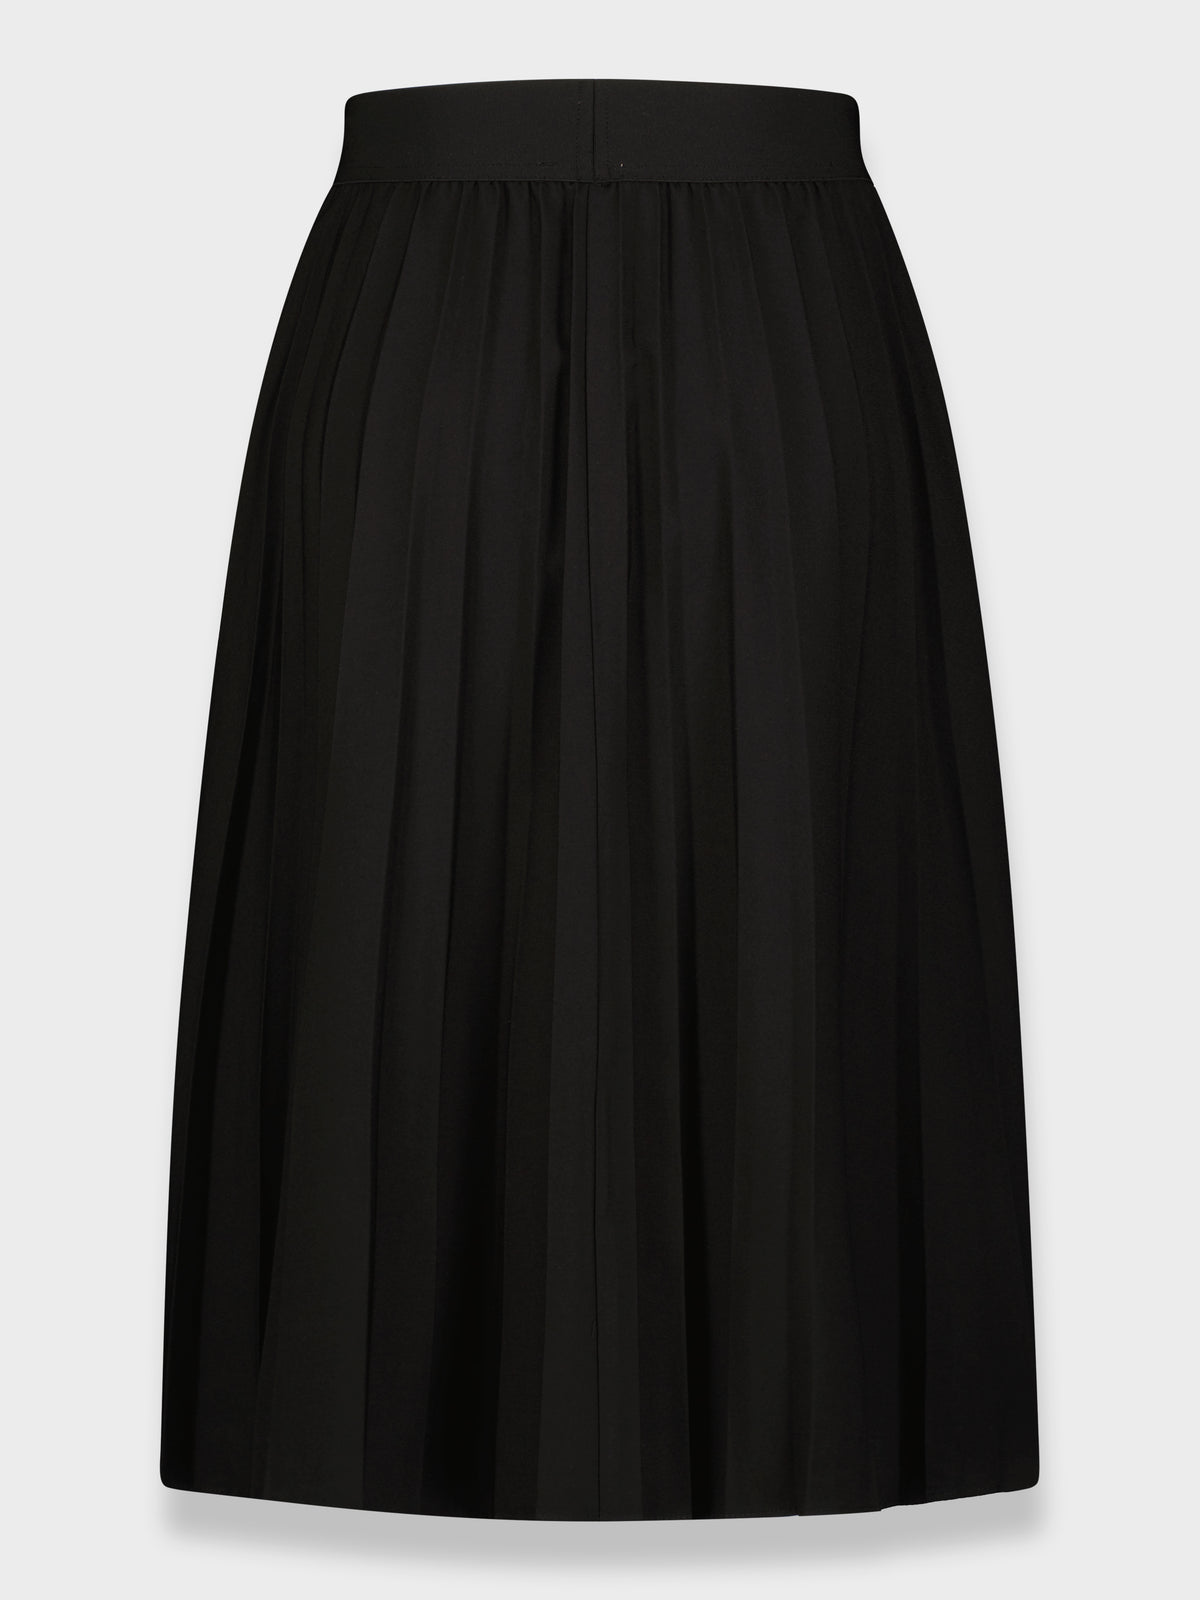 FLAT FRONT PLEATED SKIRT 35"-BLACK